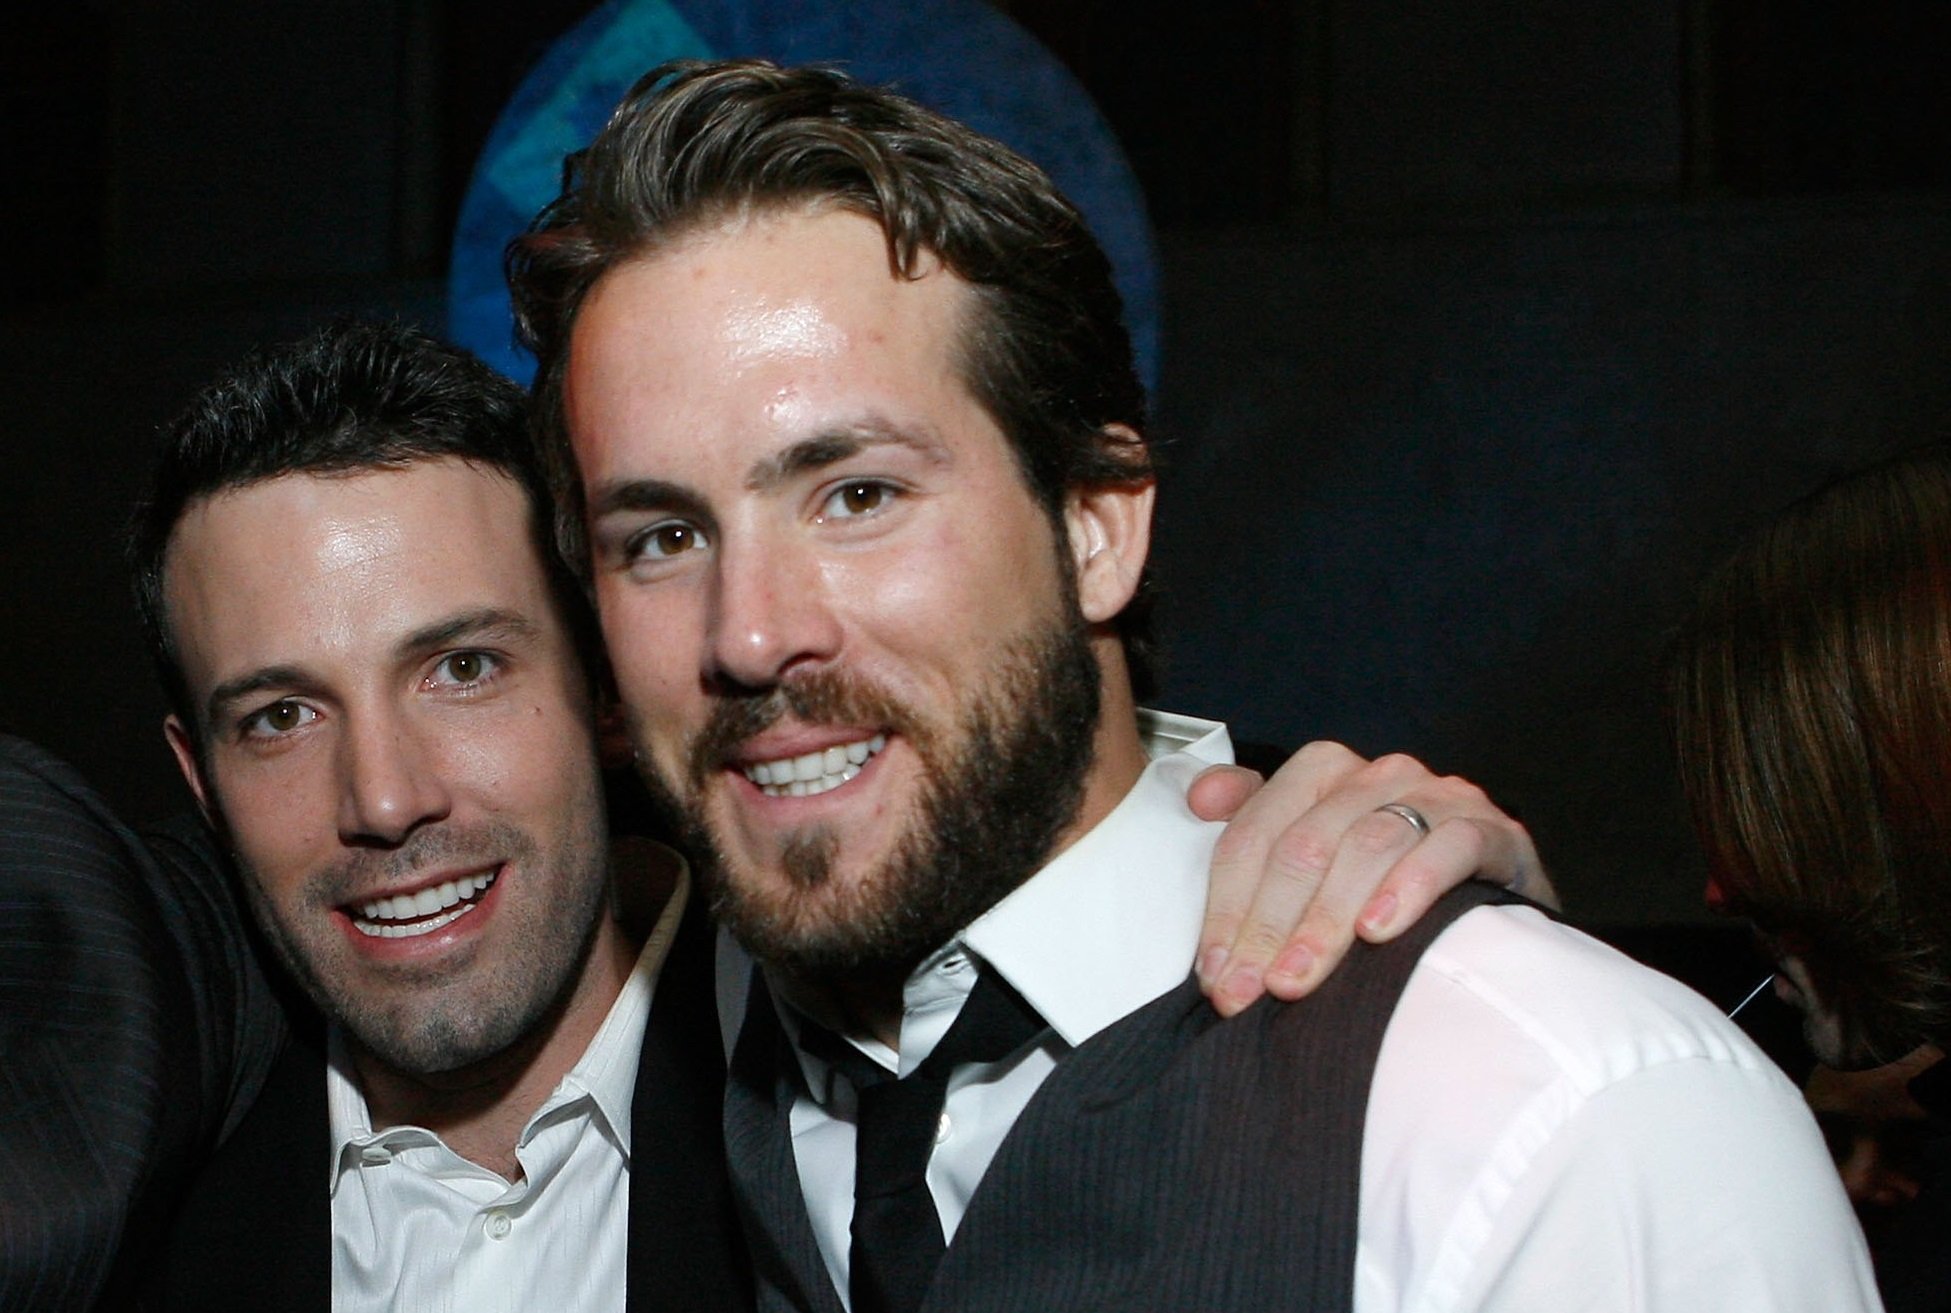 (L-R) Ben Affleck and Ryan Reynolds at the 'Smokin' Aces' premiere after party in 2007.